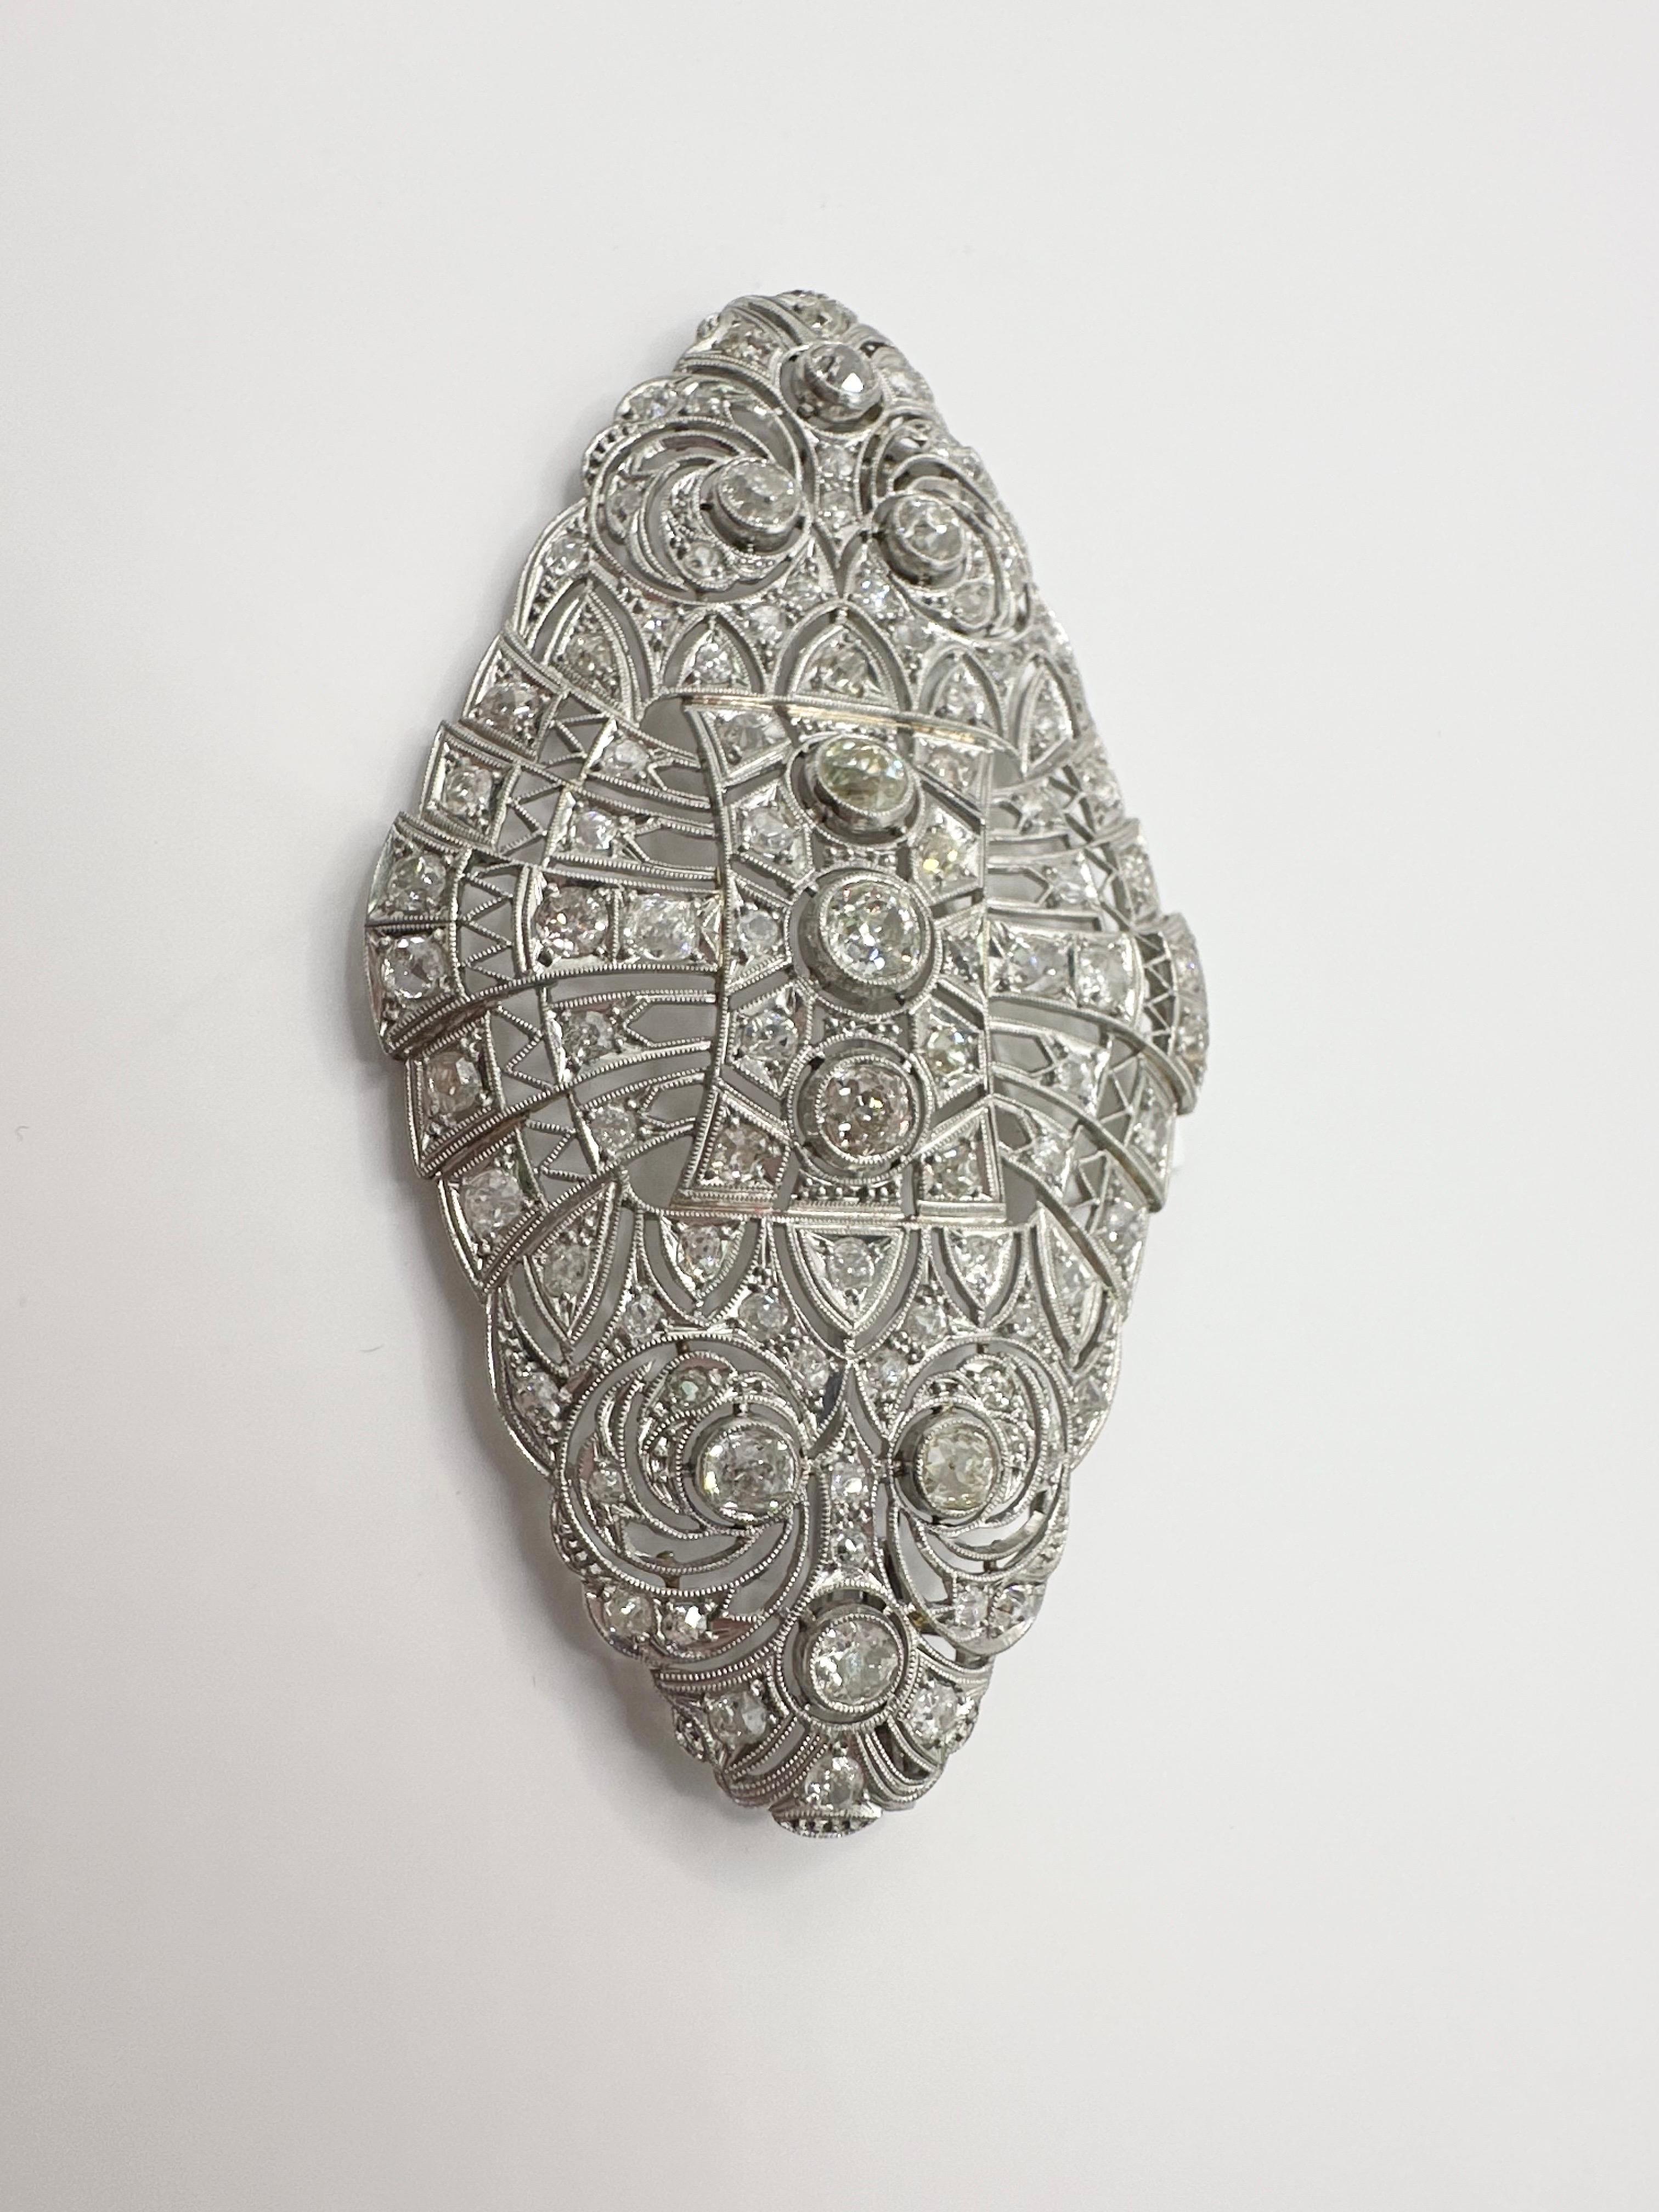 Platinum Diamond Brooch Large Artist & Year unknown  In Excellent Condition For Sale In Boca Raton, FL